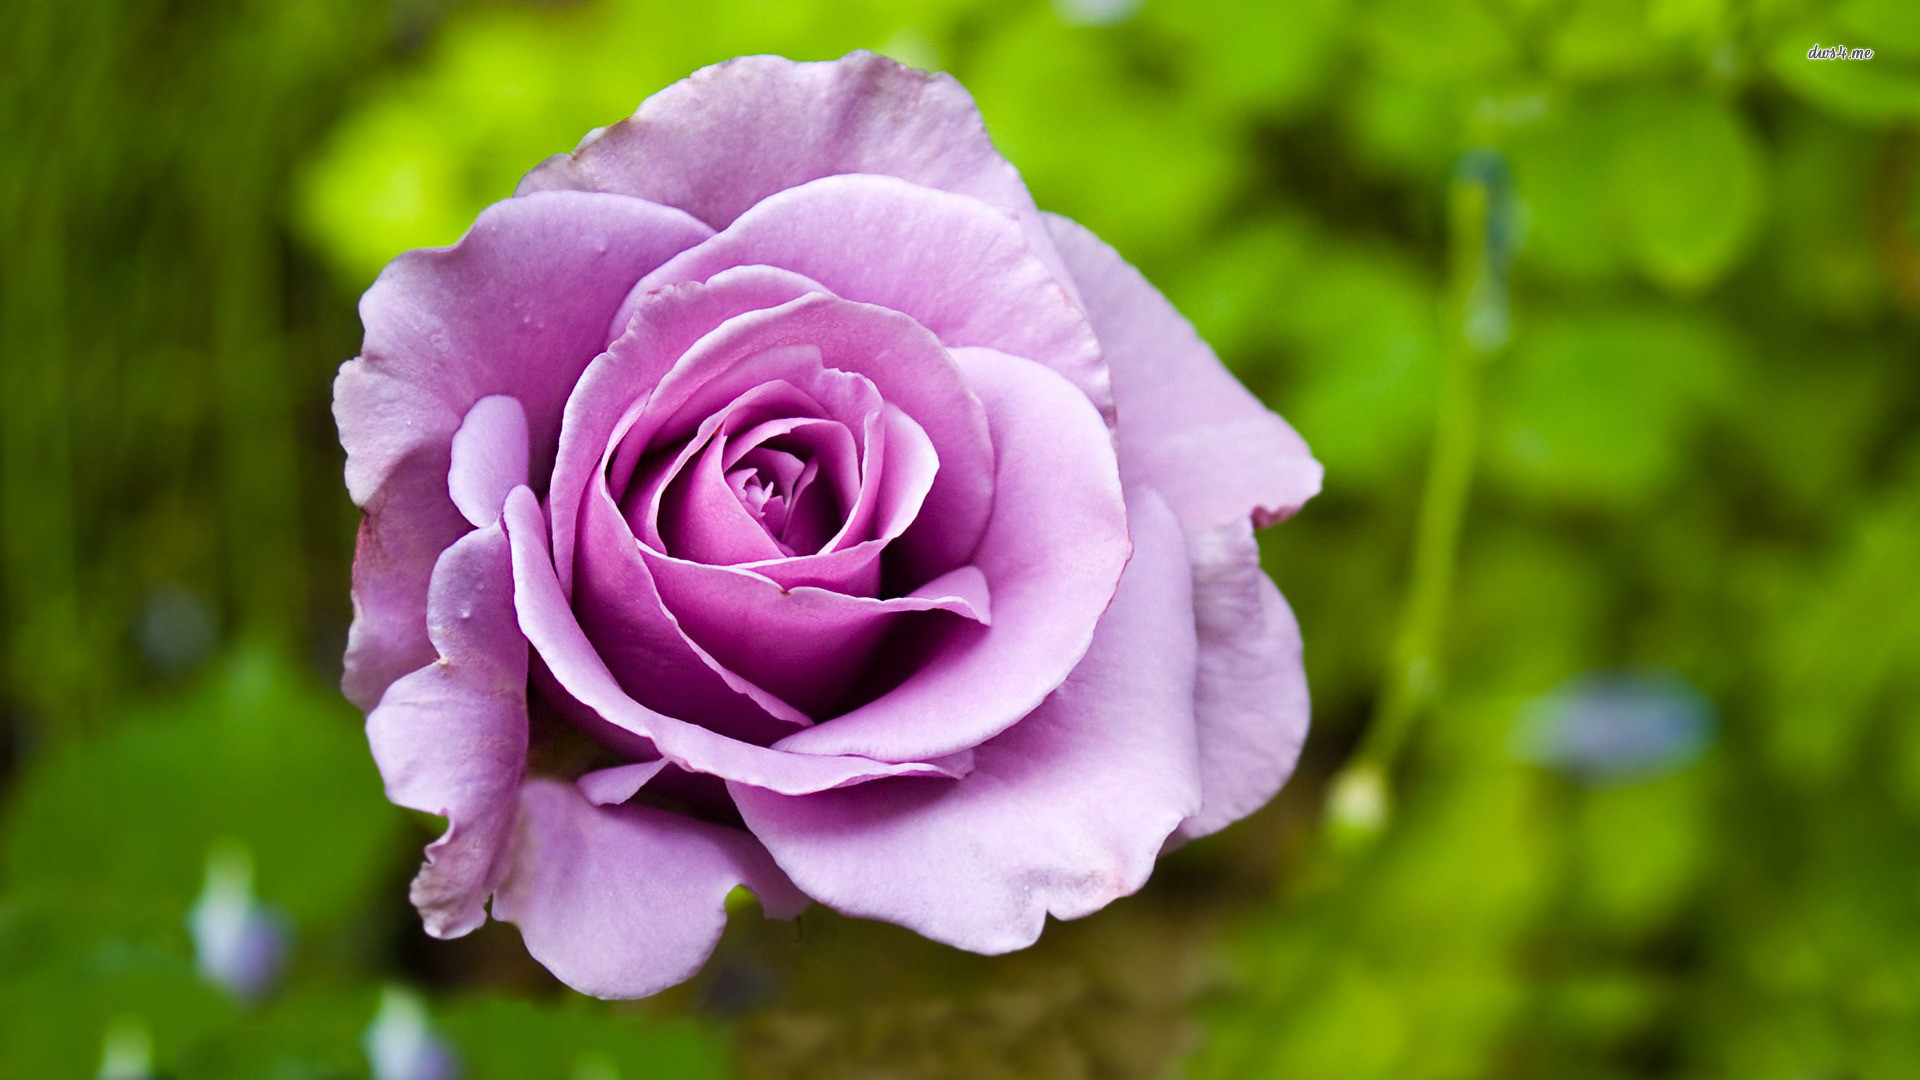 1920x1080 Nature Flowers Purple rose on a background of grass #wallpapers